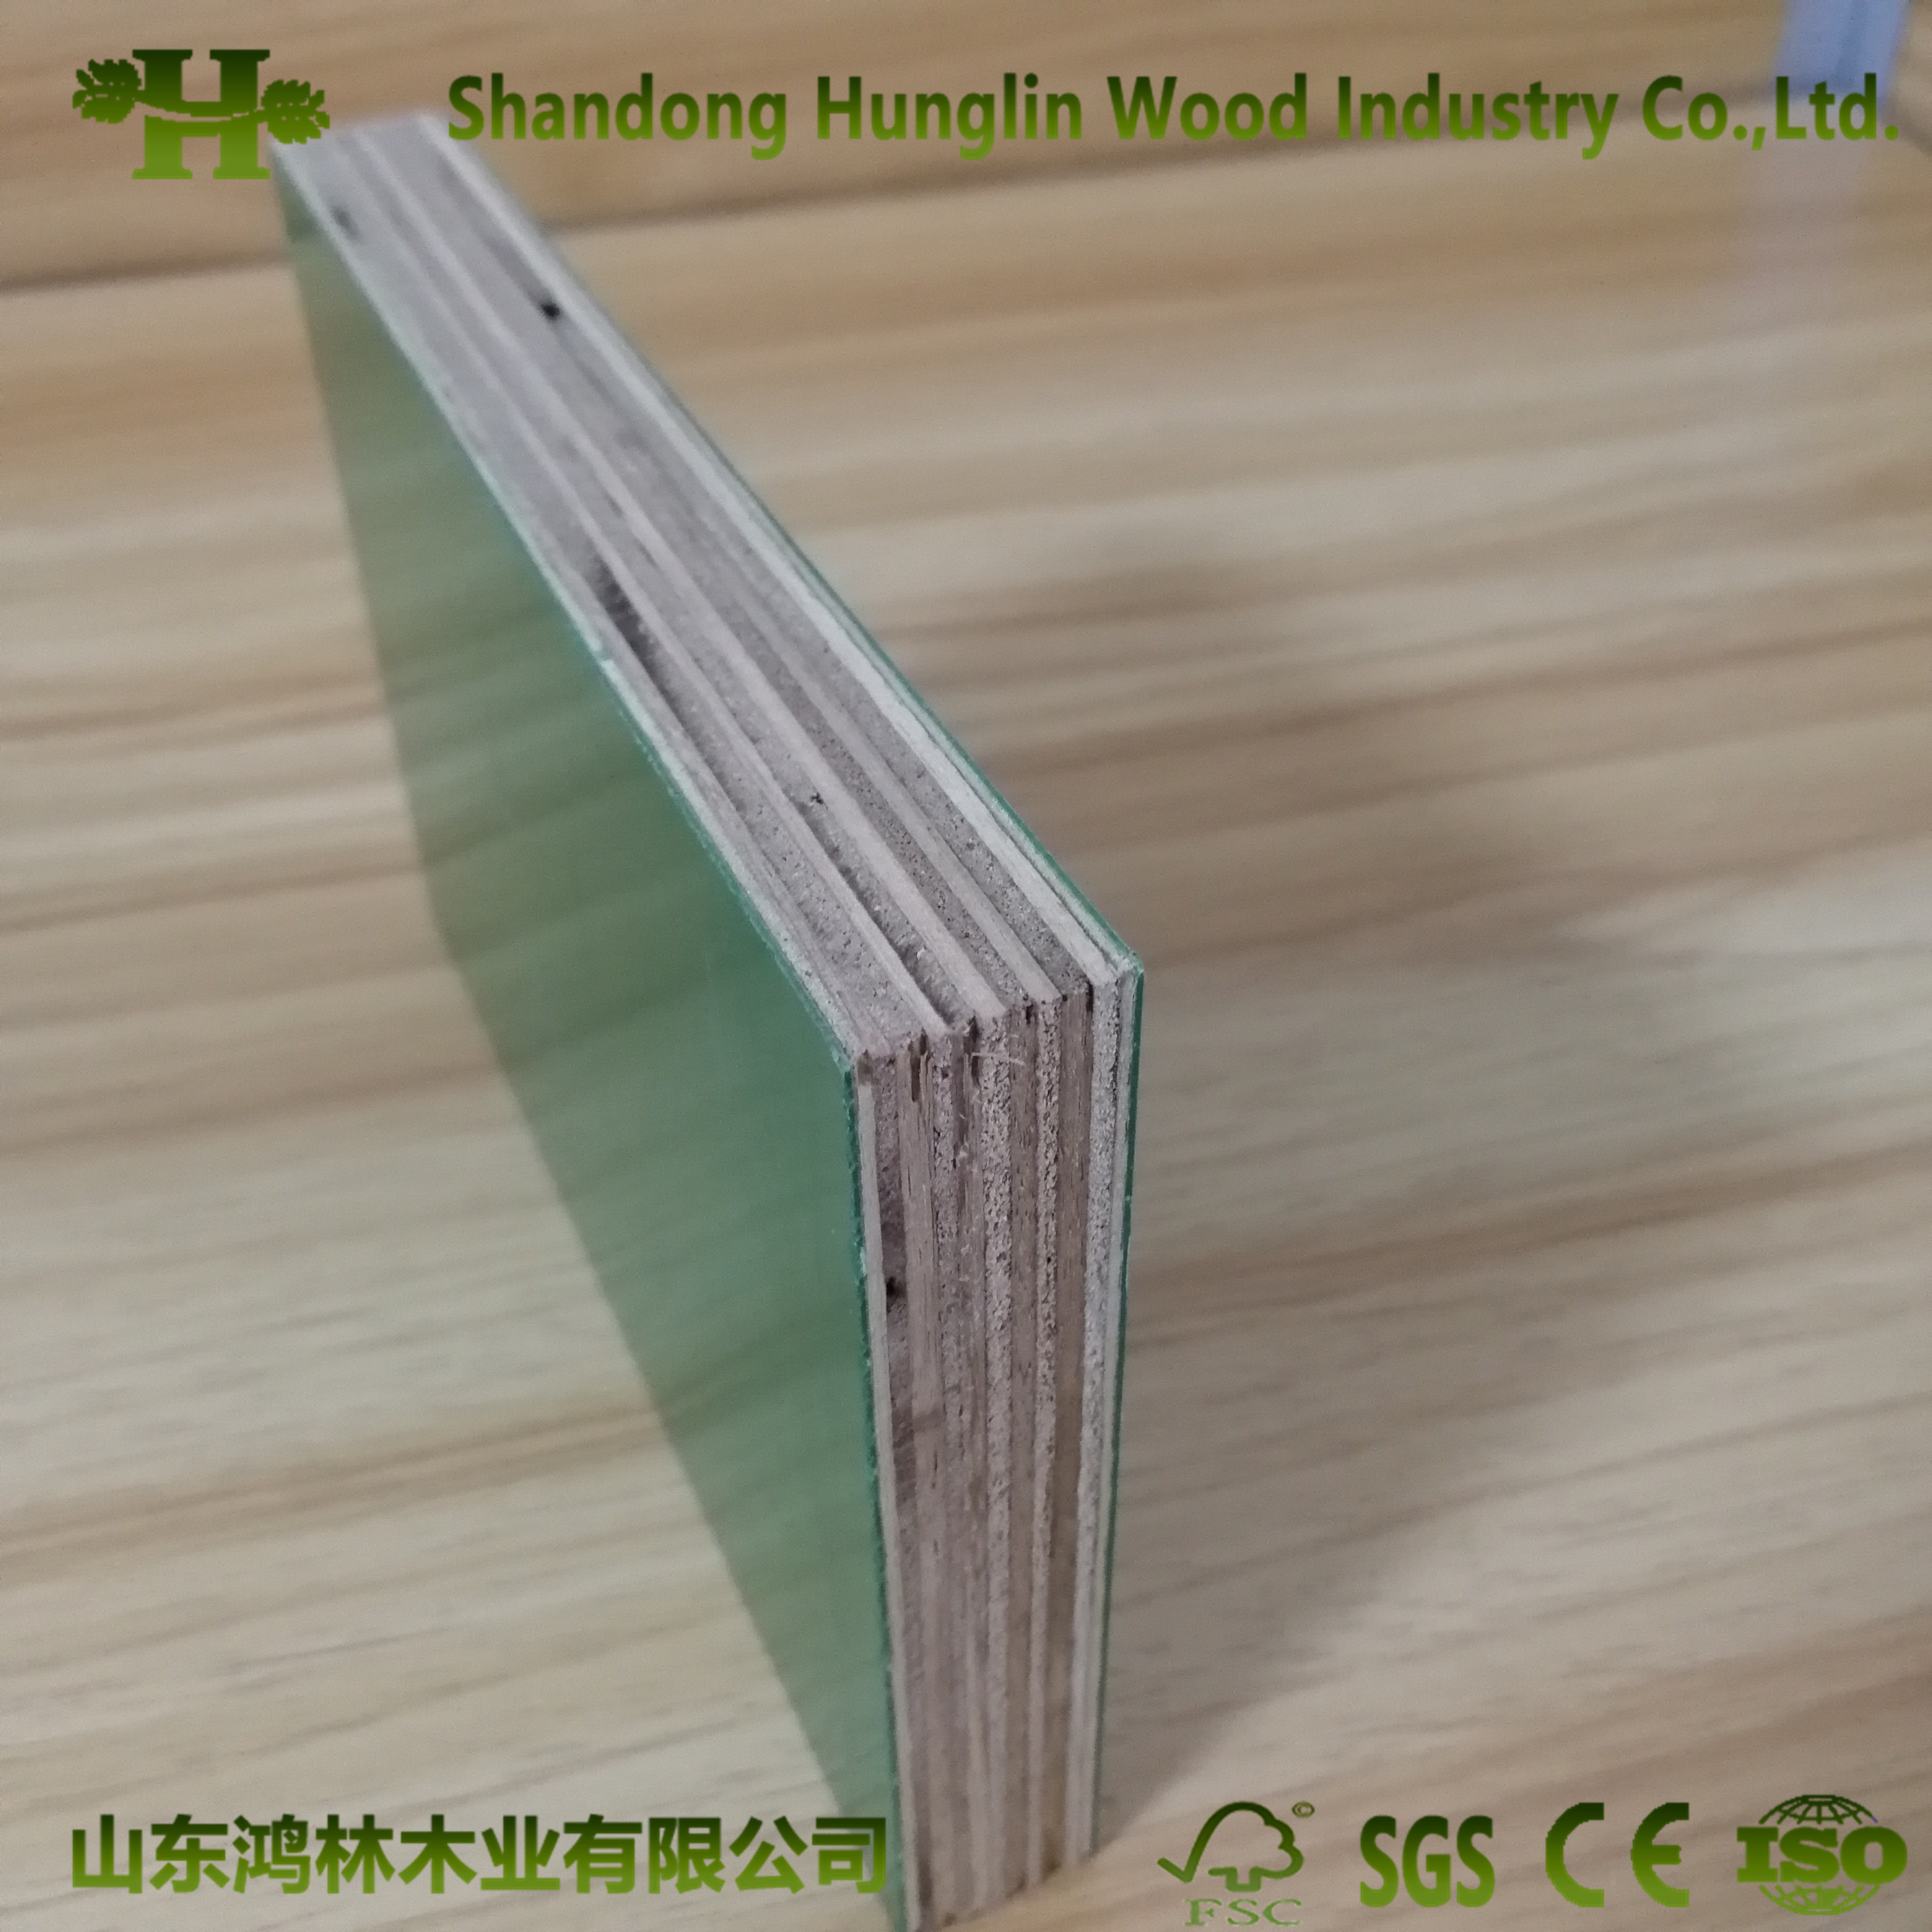 PVC PP Plastic Faced Plywood for Construction Usuage Times 10-30